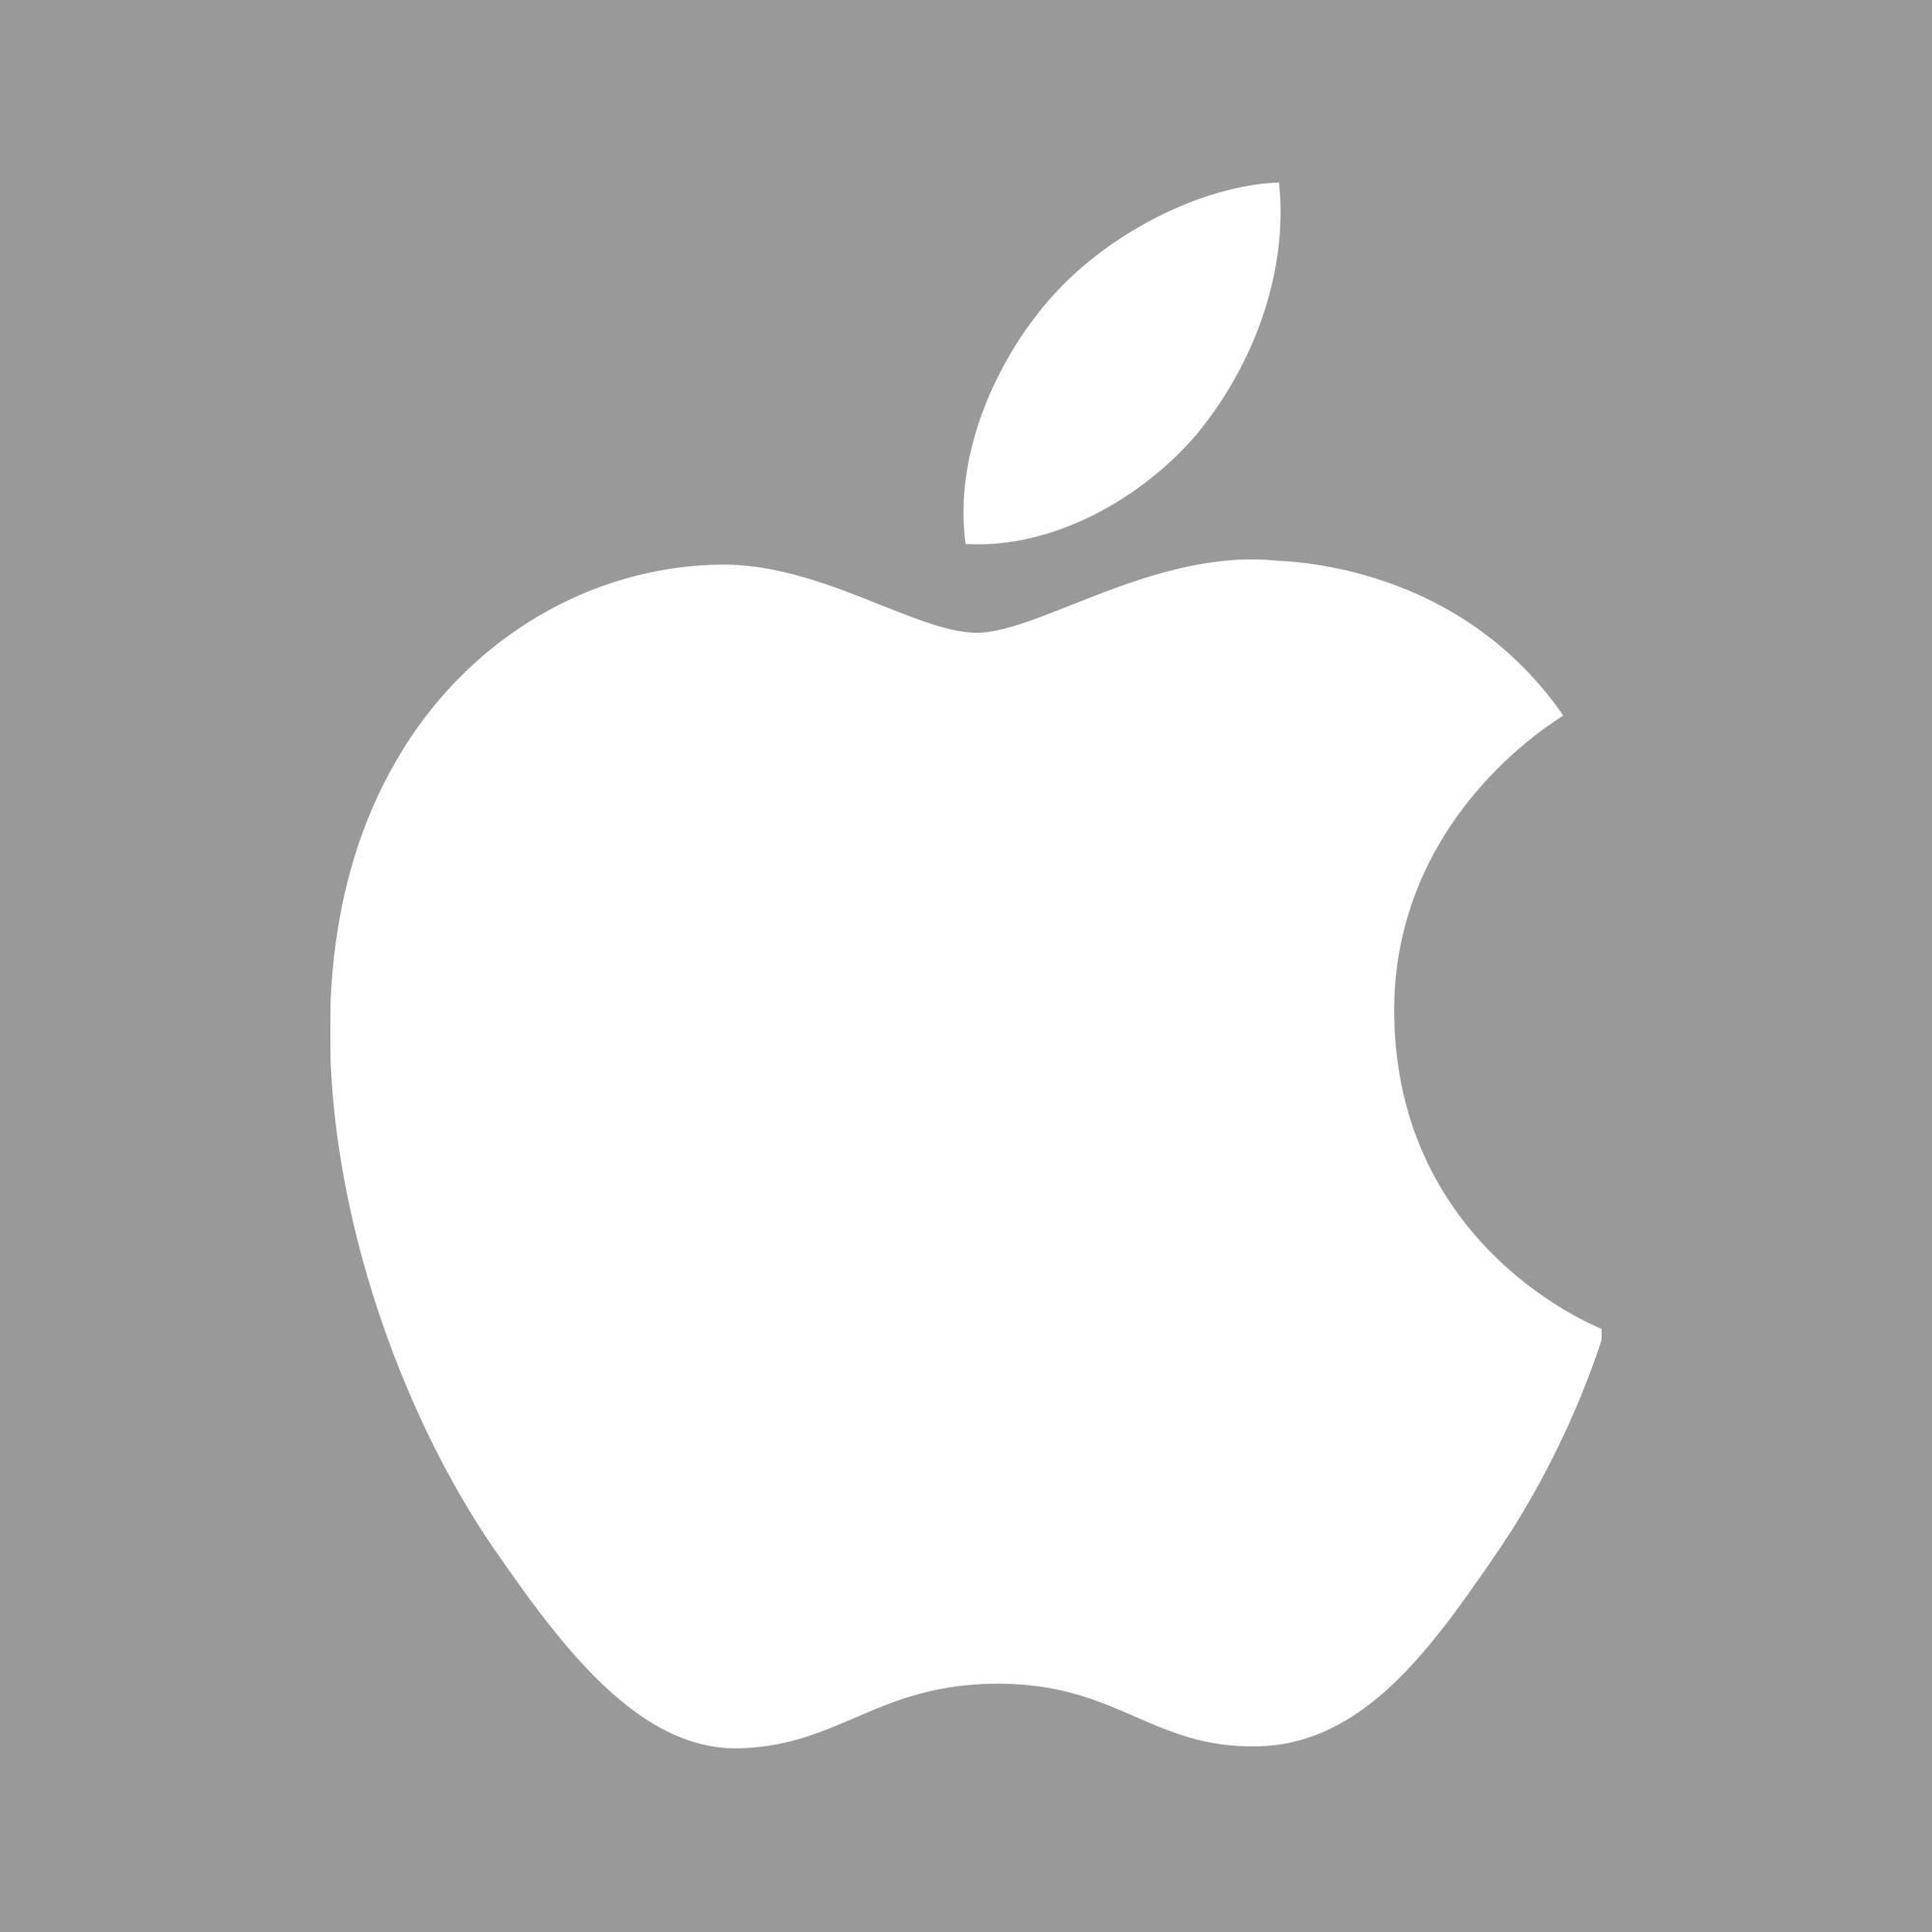 Current Apple Logo - File:Apple gray logo.png - Wikimedia Commons